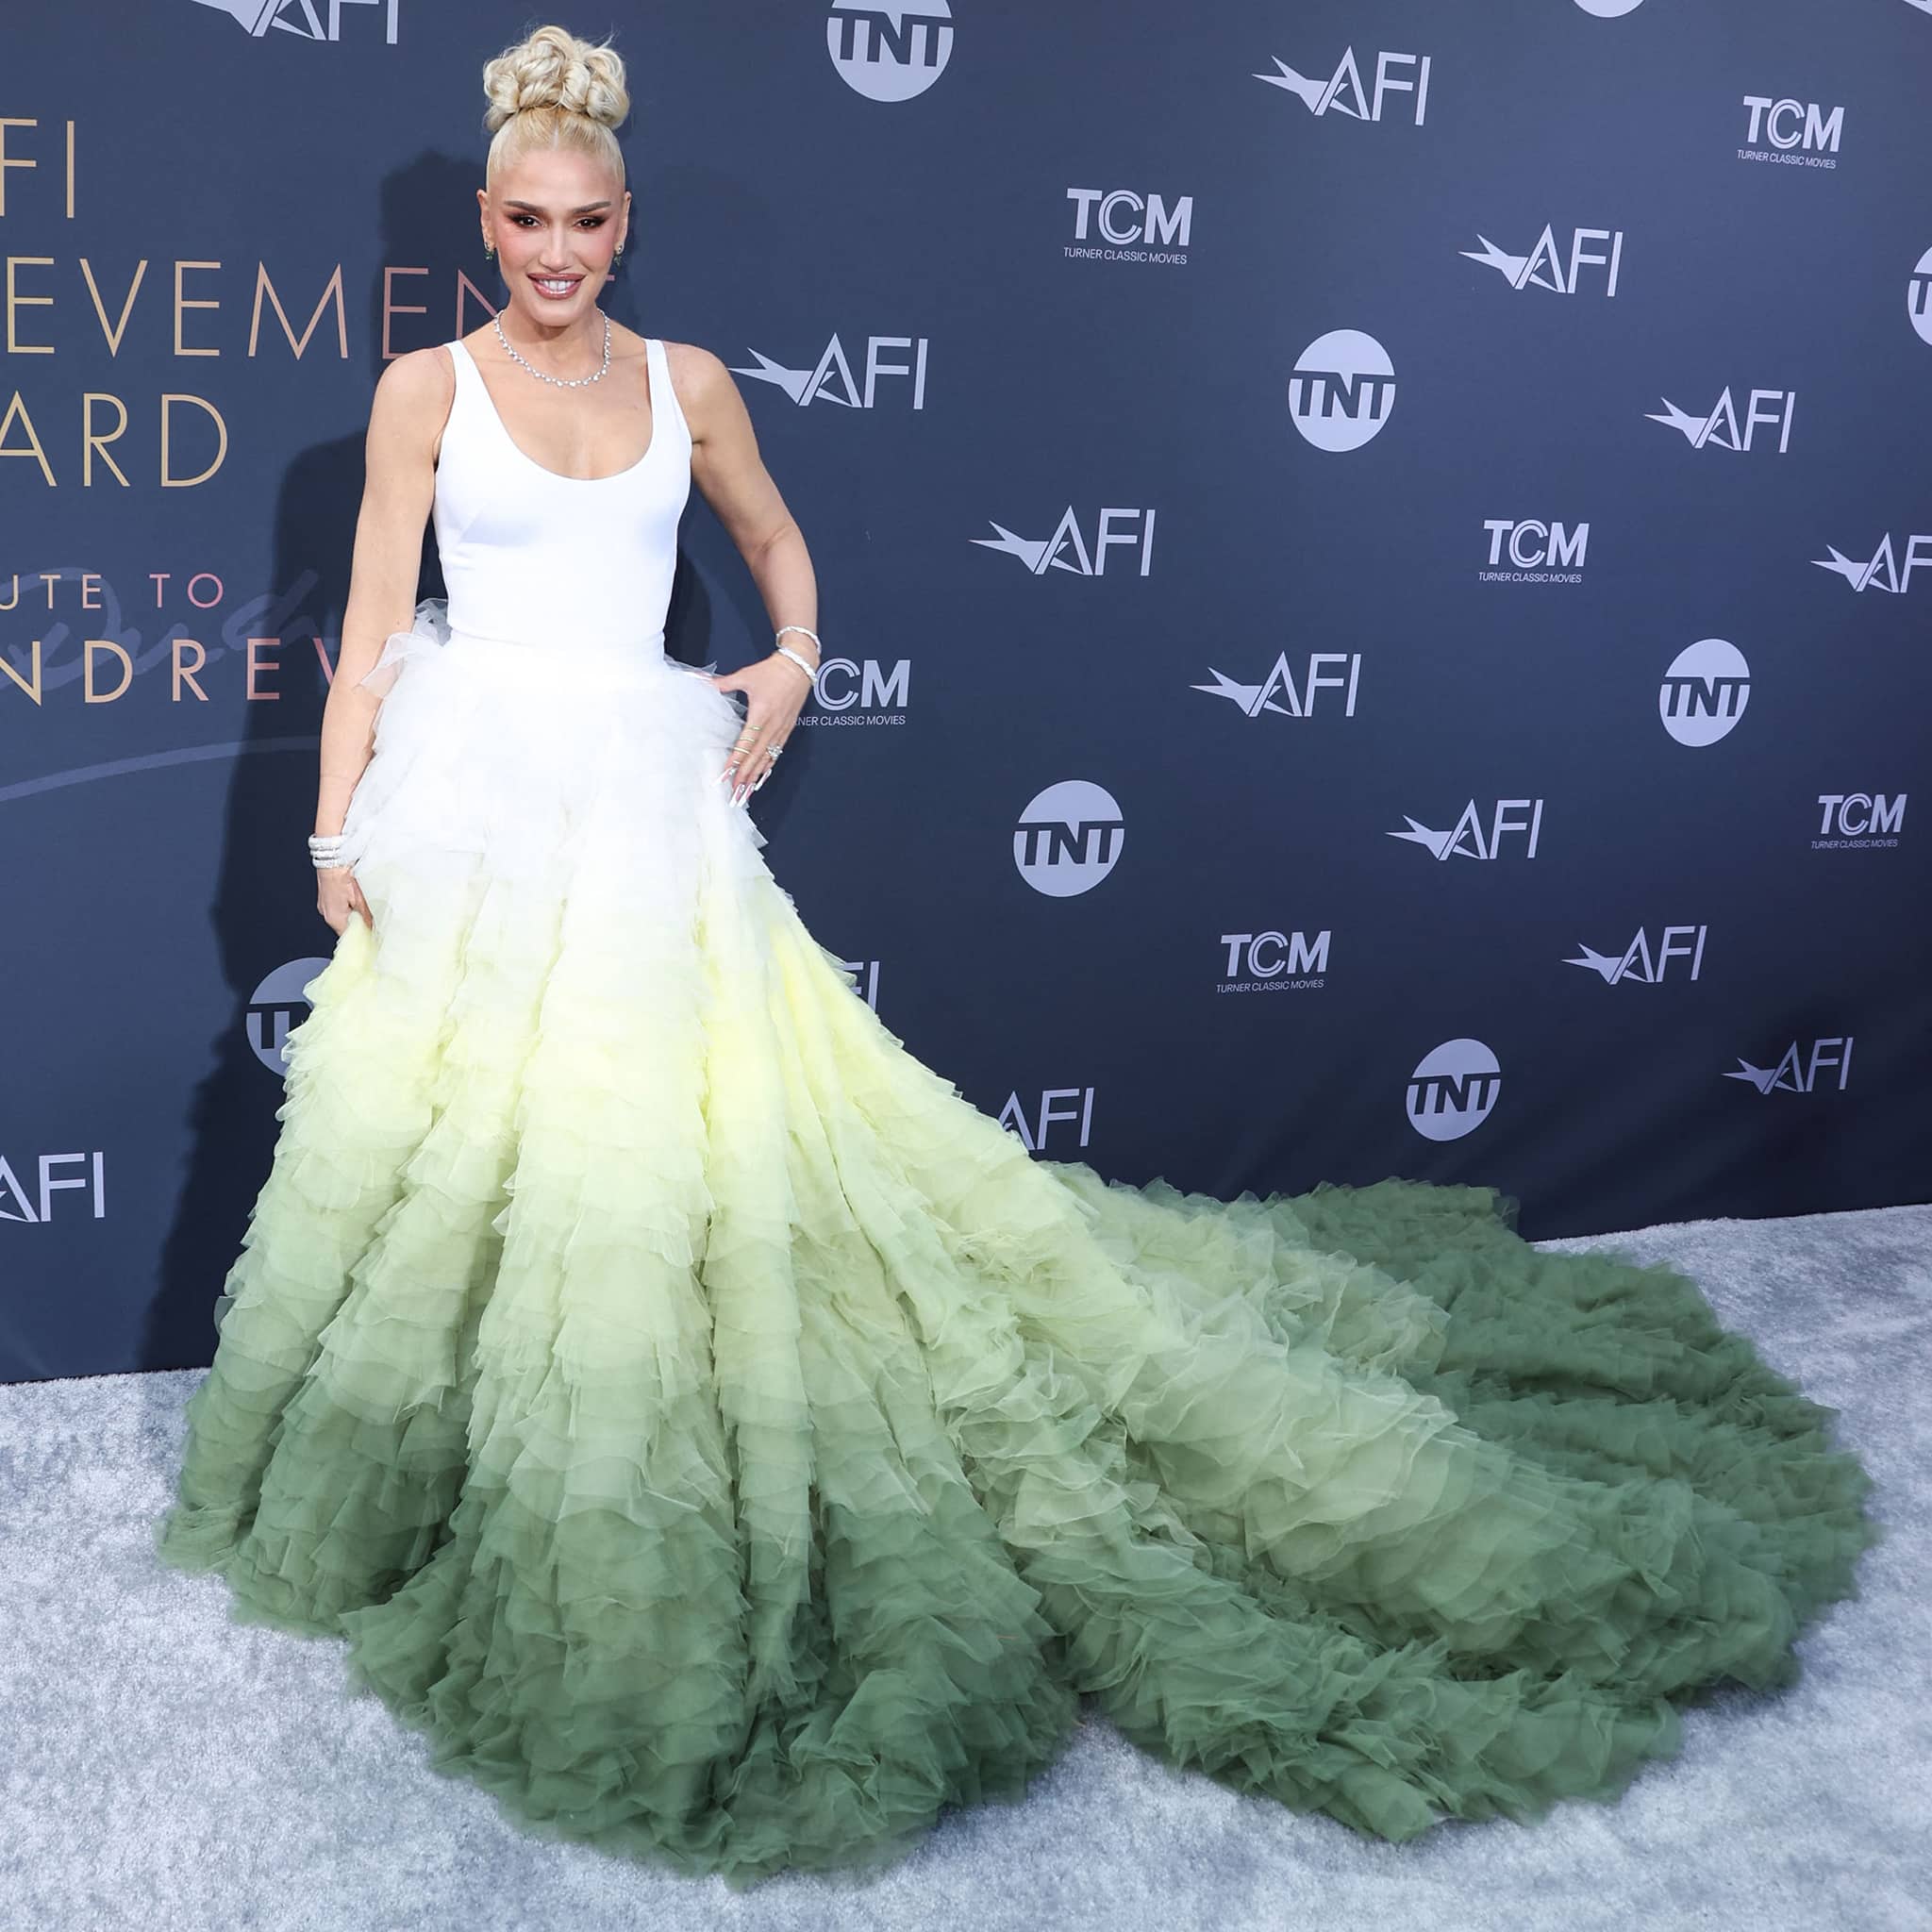 Gwen Stefani fangirls over Julie Andrews in the scene-stealing gown that features a white tank-style bodice and a voluminous ruffled skirt